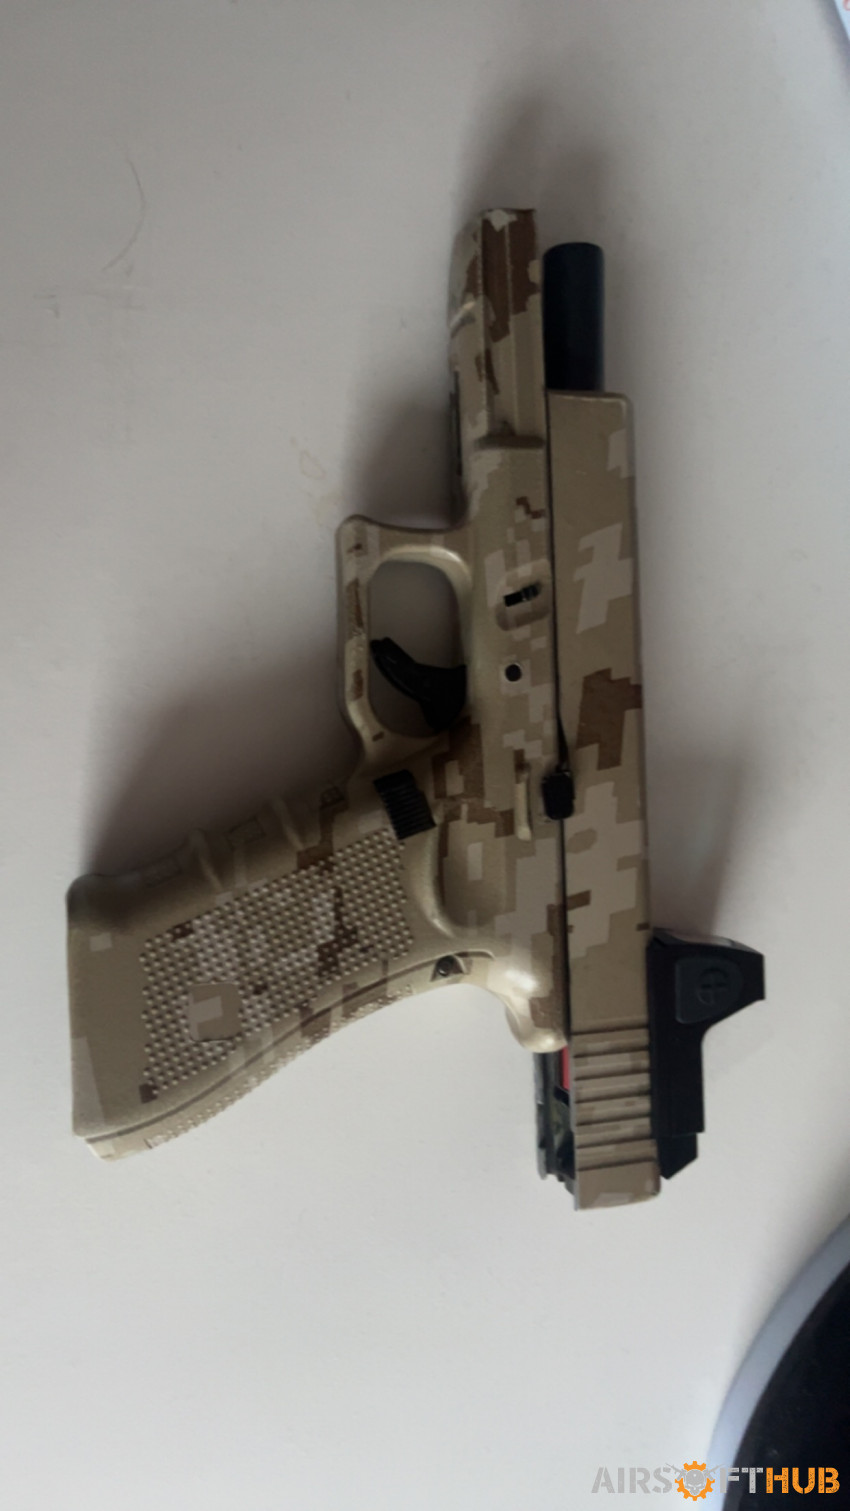 Glock 17 gas airsoft pistol - Used airsoft equipment